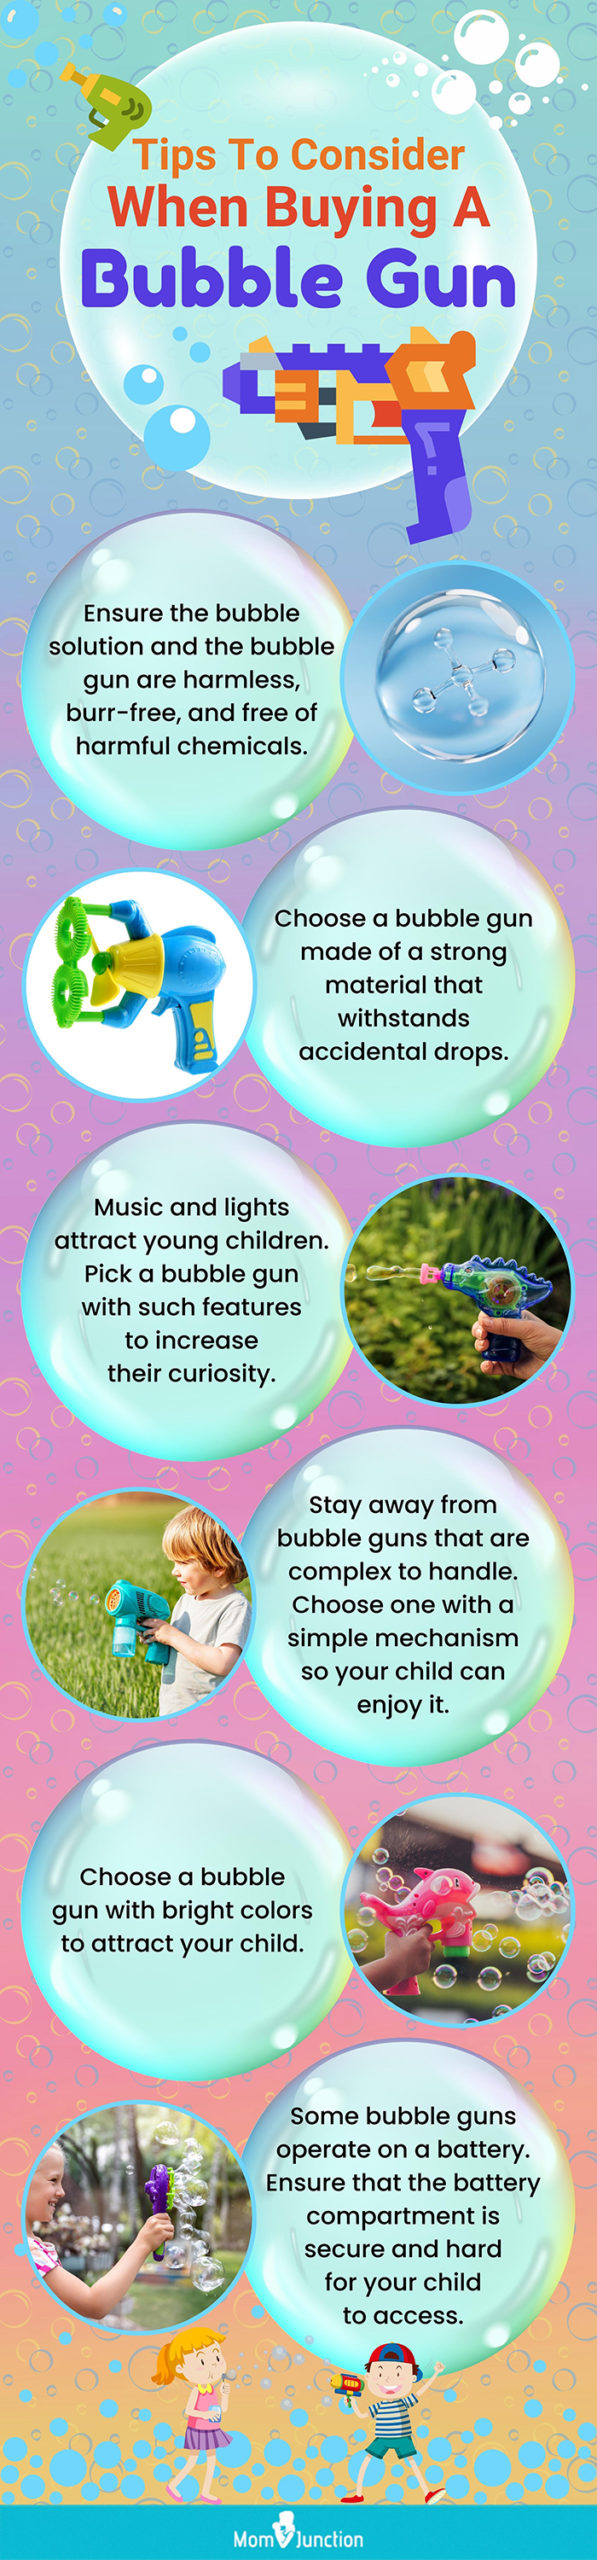 Tips To Consider When Buying A Bubble Gun (Infographic)